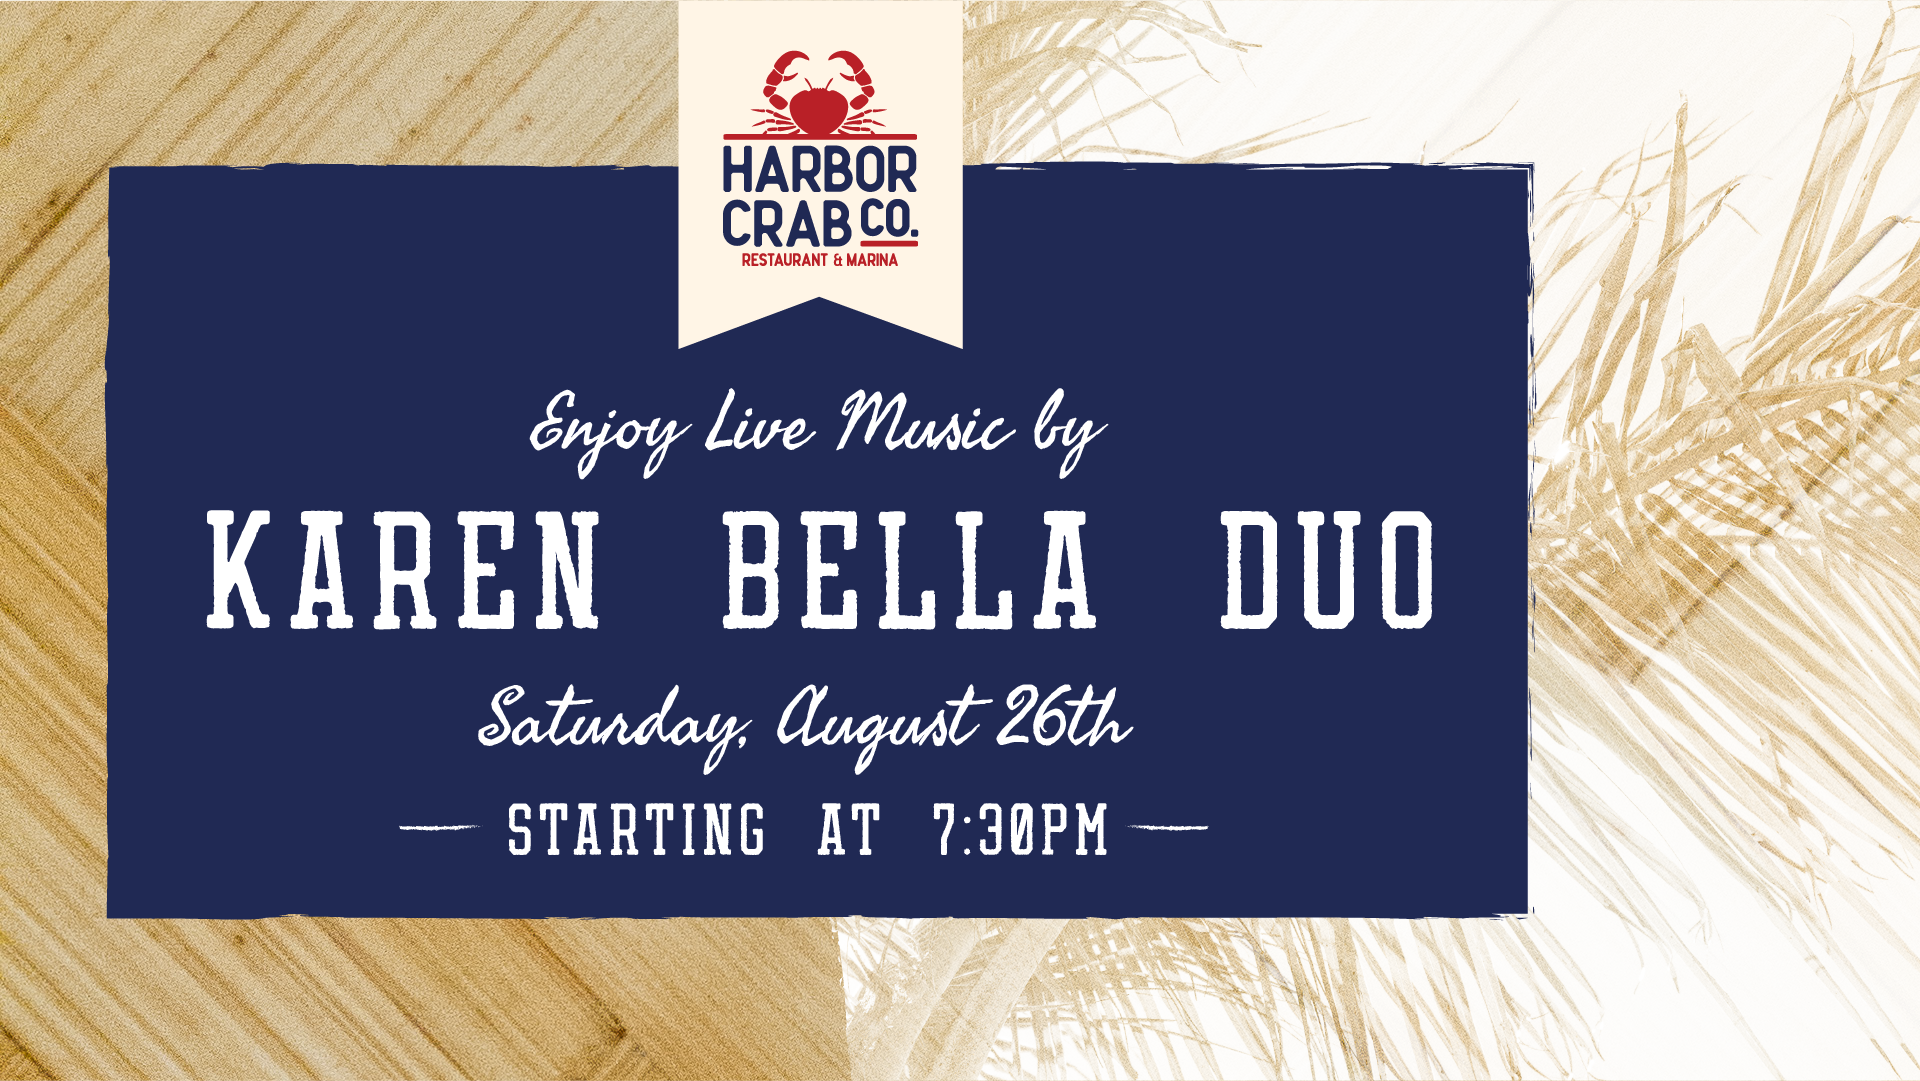 Live Music with Karen Bella Duo on Saturday, August 26th at 7:30pm.